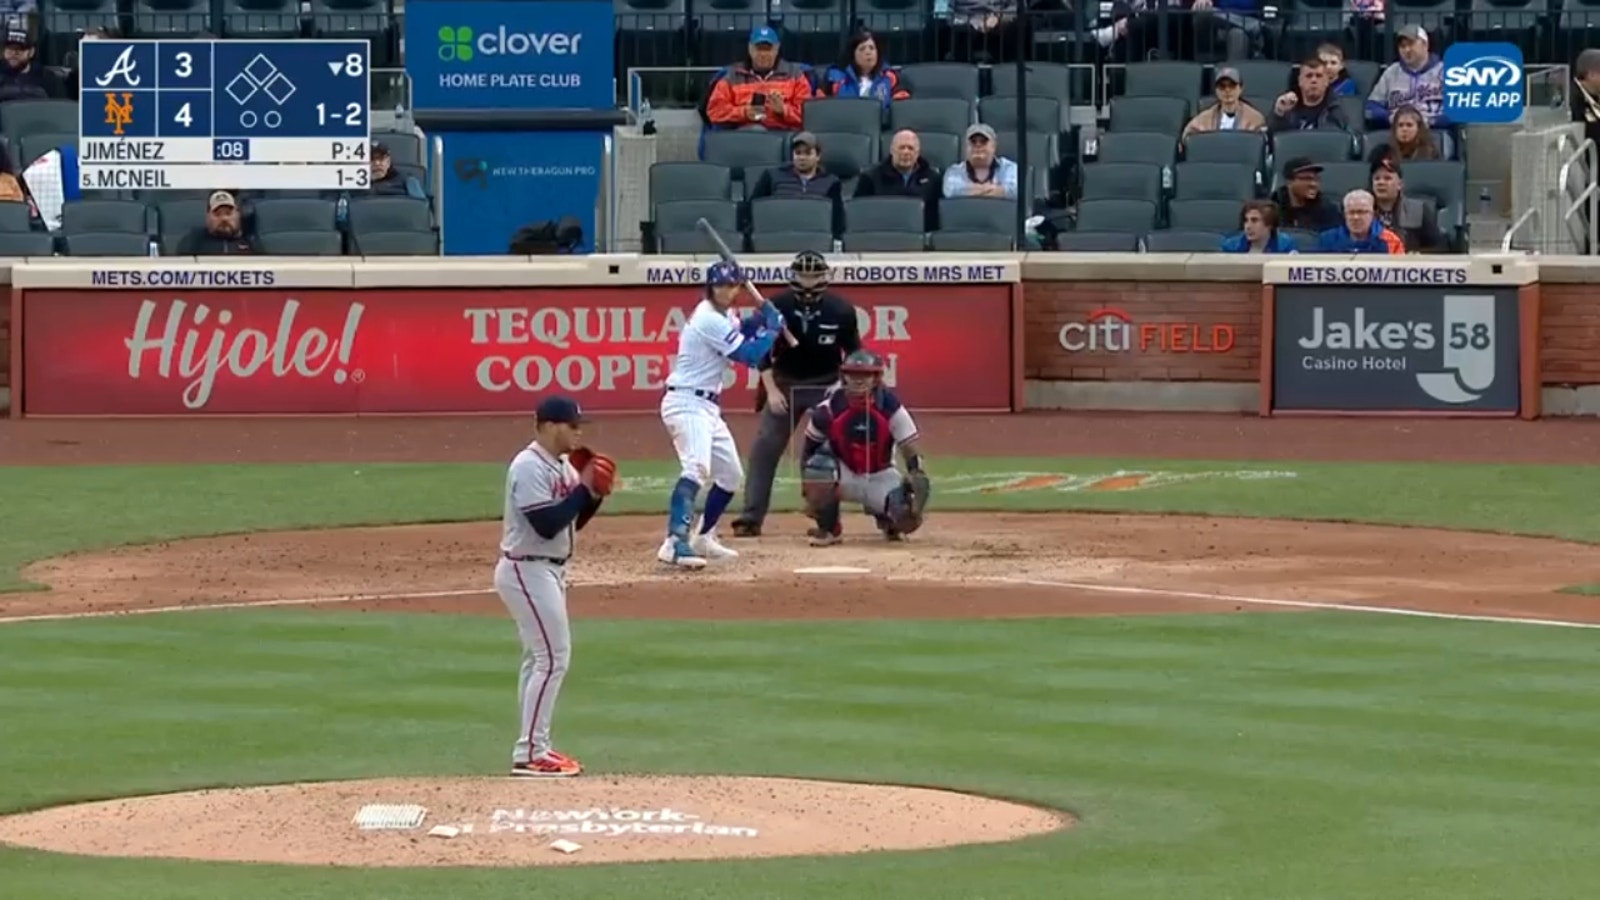 Jeff McNeil launches solo home run to give Mets a 5-3 lead over Braves